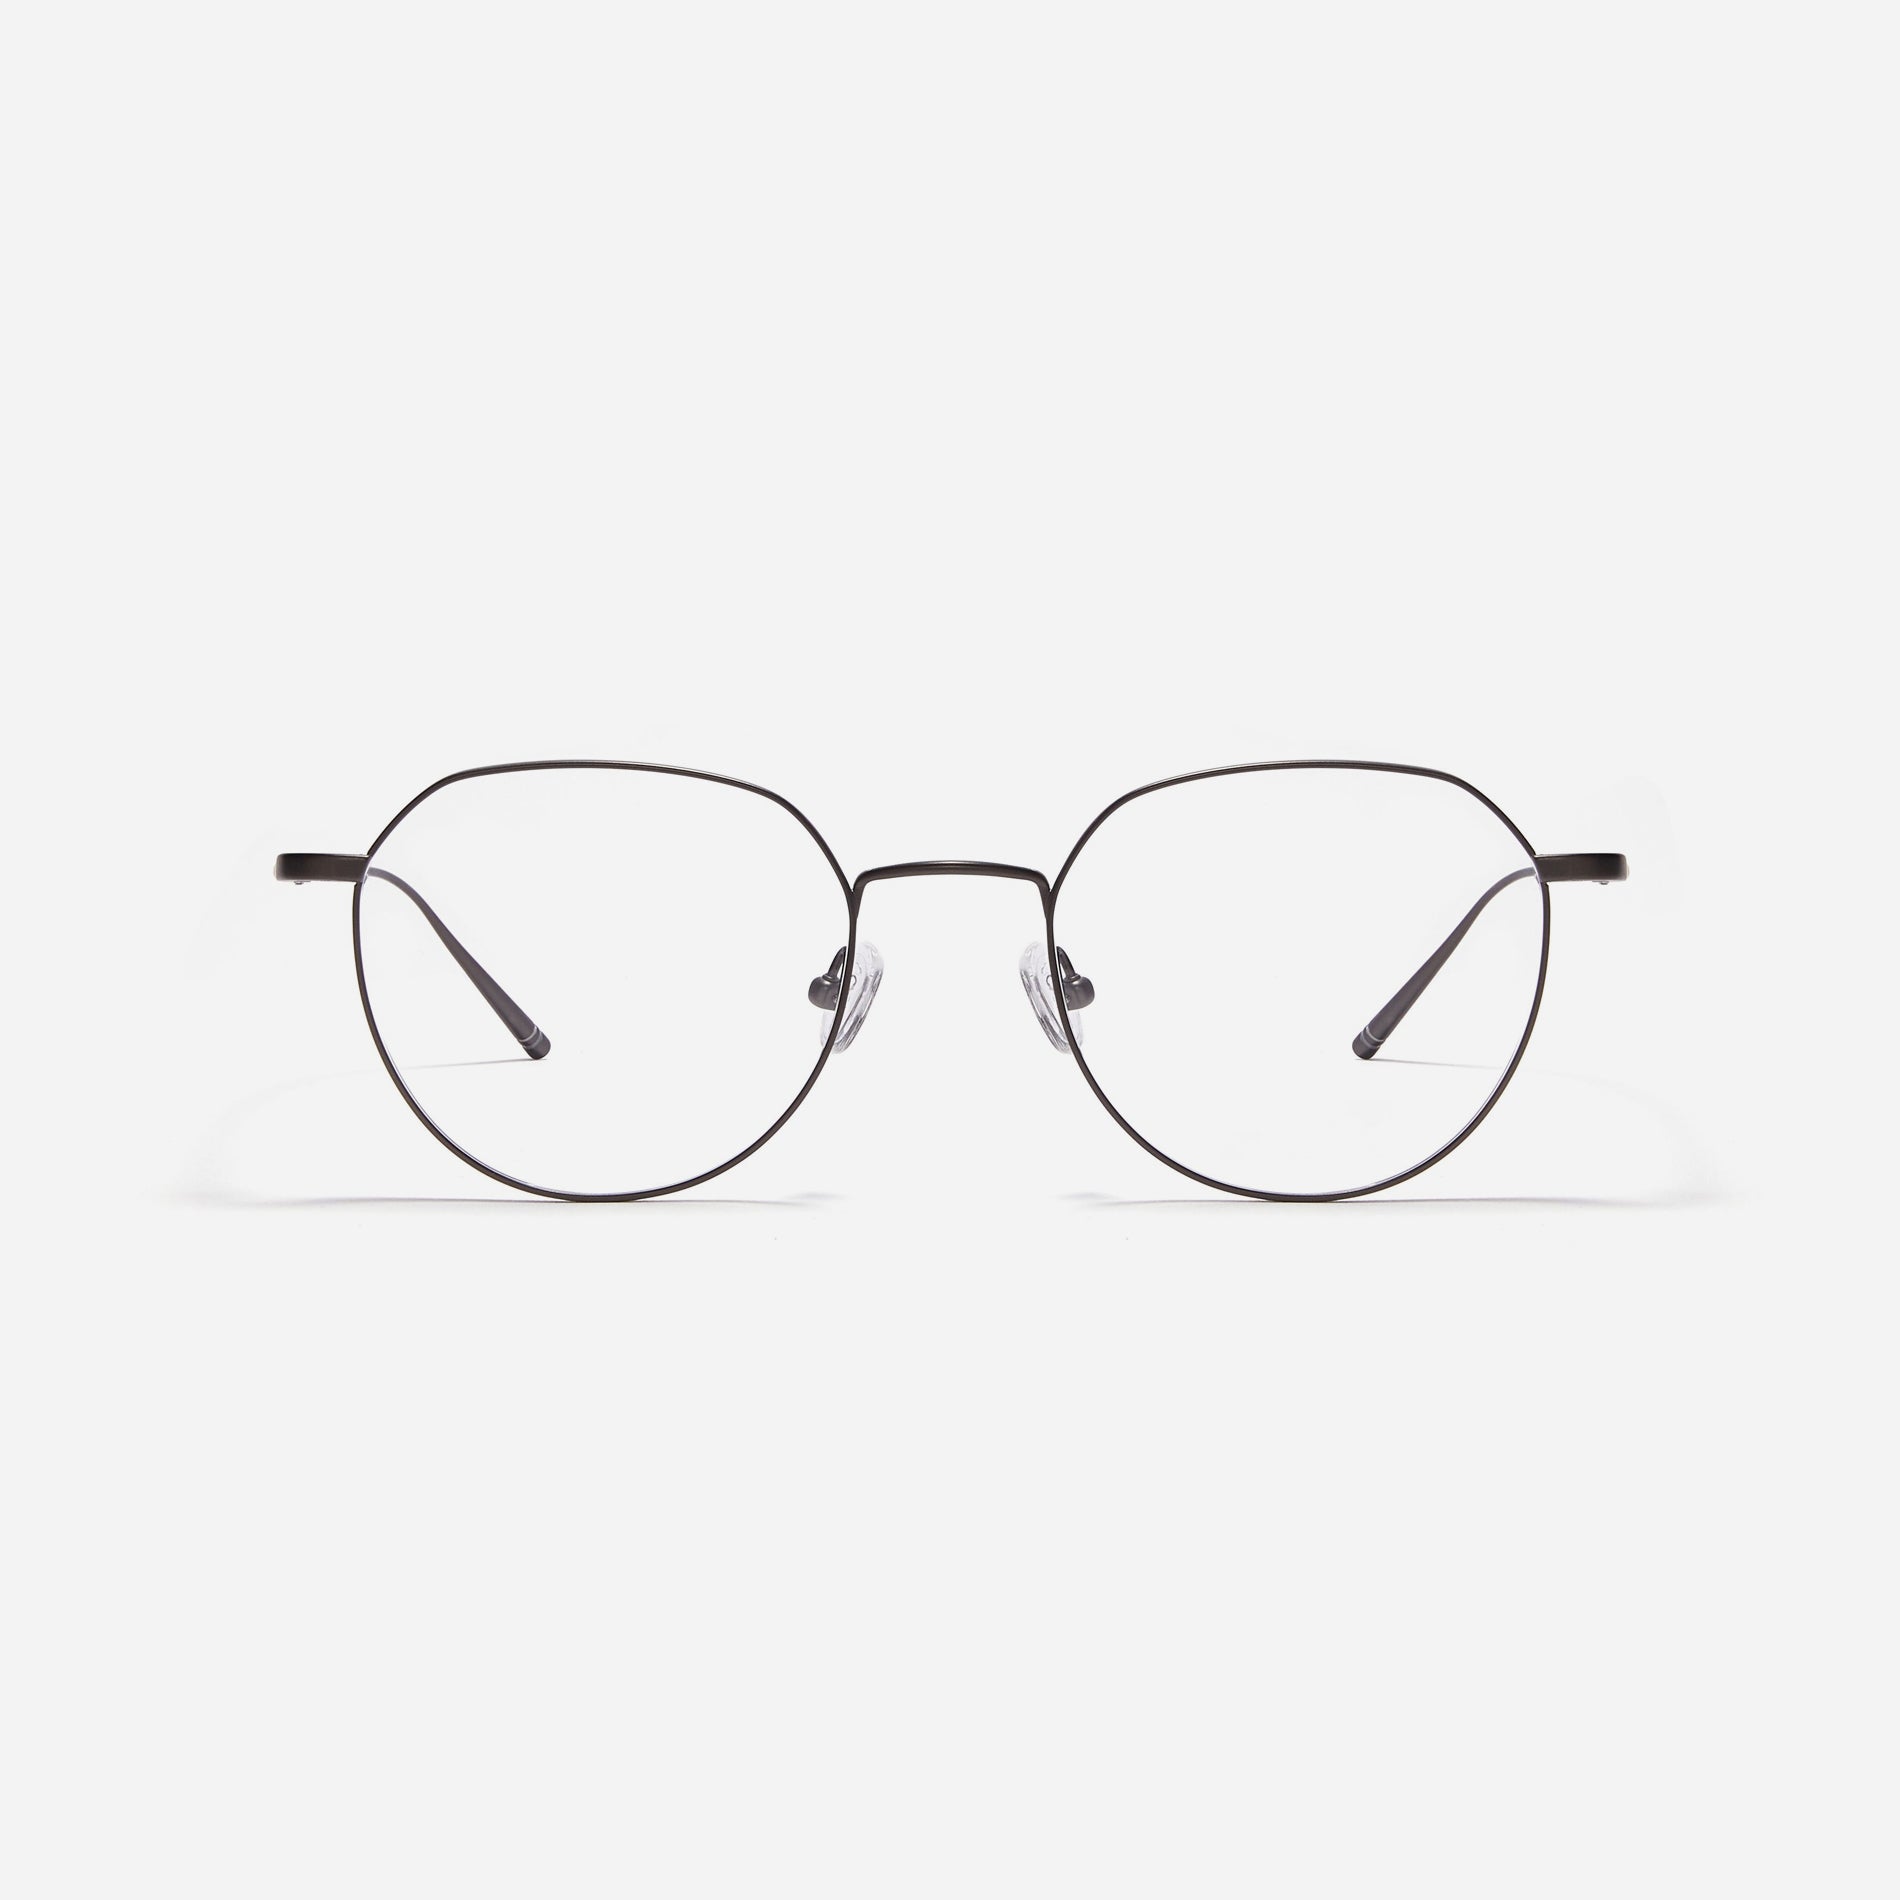 Polygonal-shaped, full-metal eyeglasses with a dual-rim structure designed to accommodate thicker, high-prescription lenses. Both the frame and temples are made of pure titanium, ensuring a lightweight and comfortable fit.